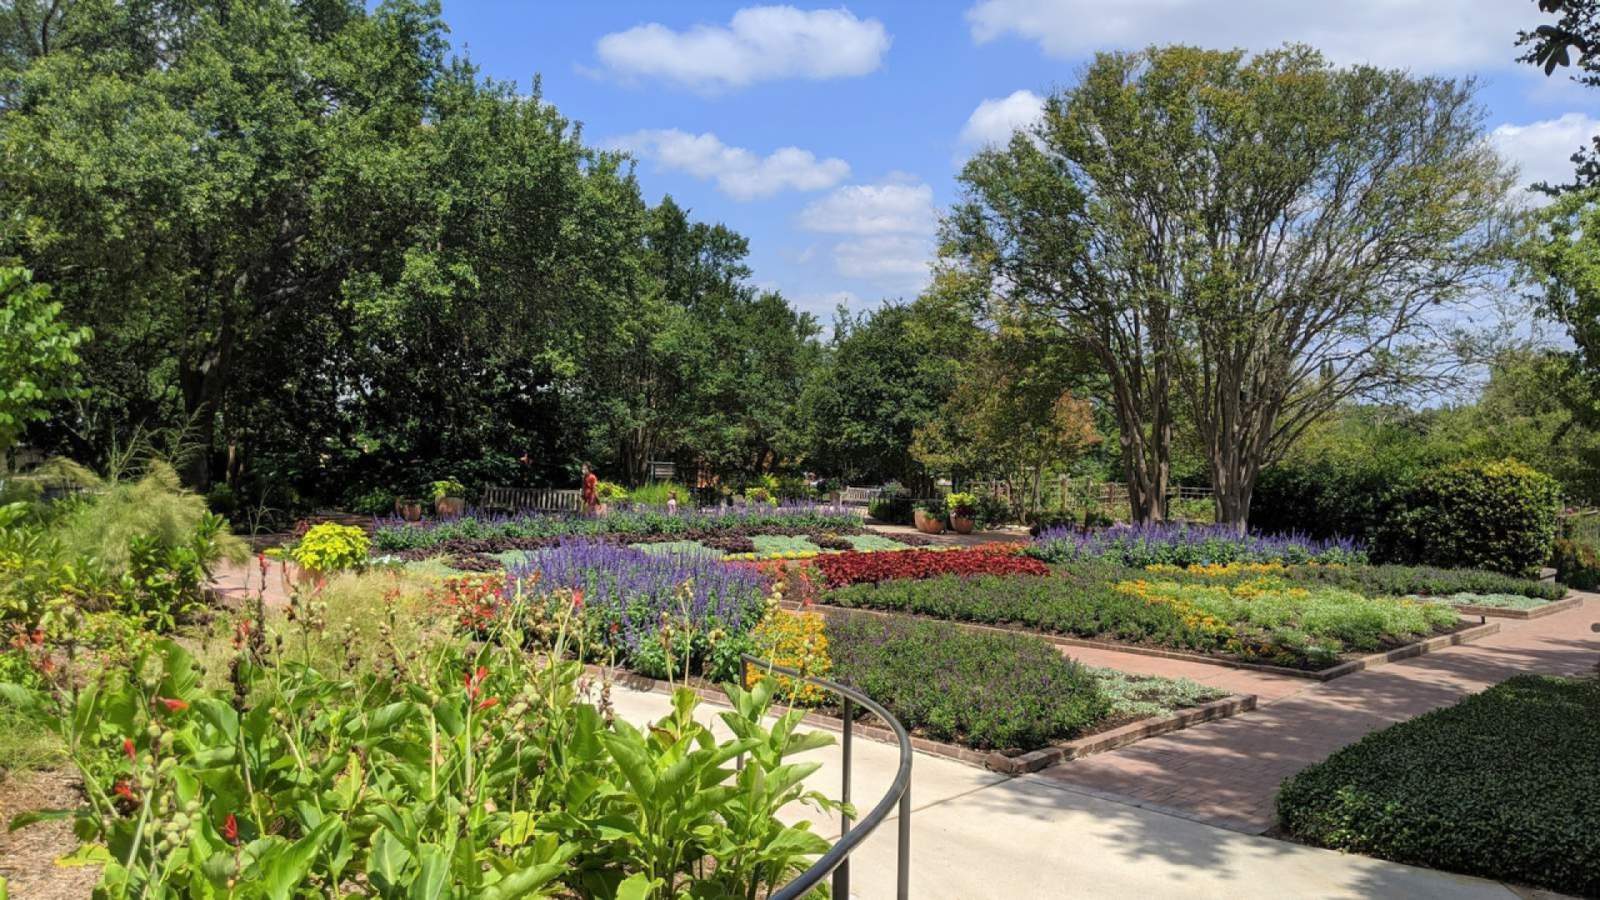 San Antonio Botanical Garden giving free admission to teachers, school staff for limited time